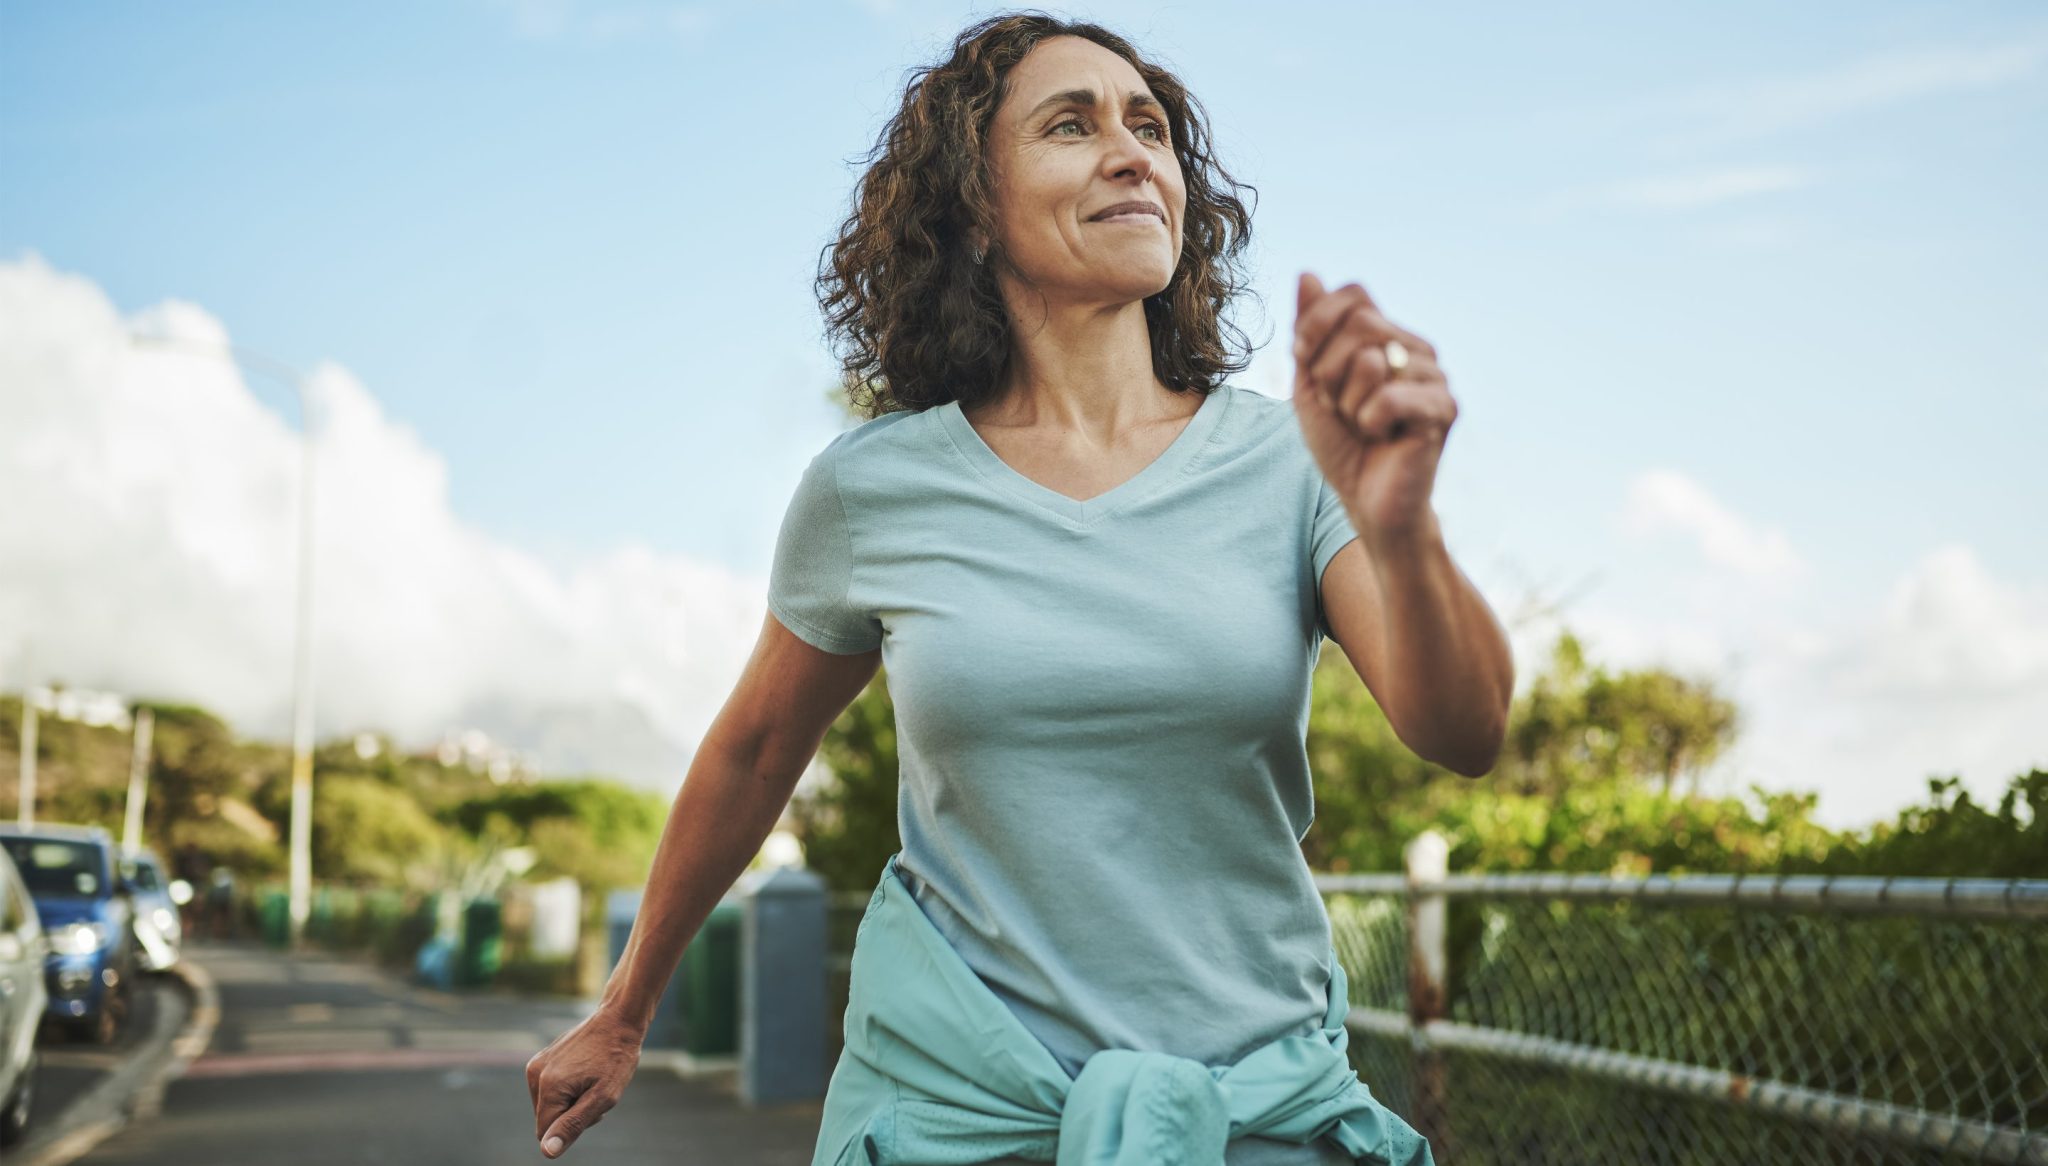 Walking at a faster pace may help you live longer